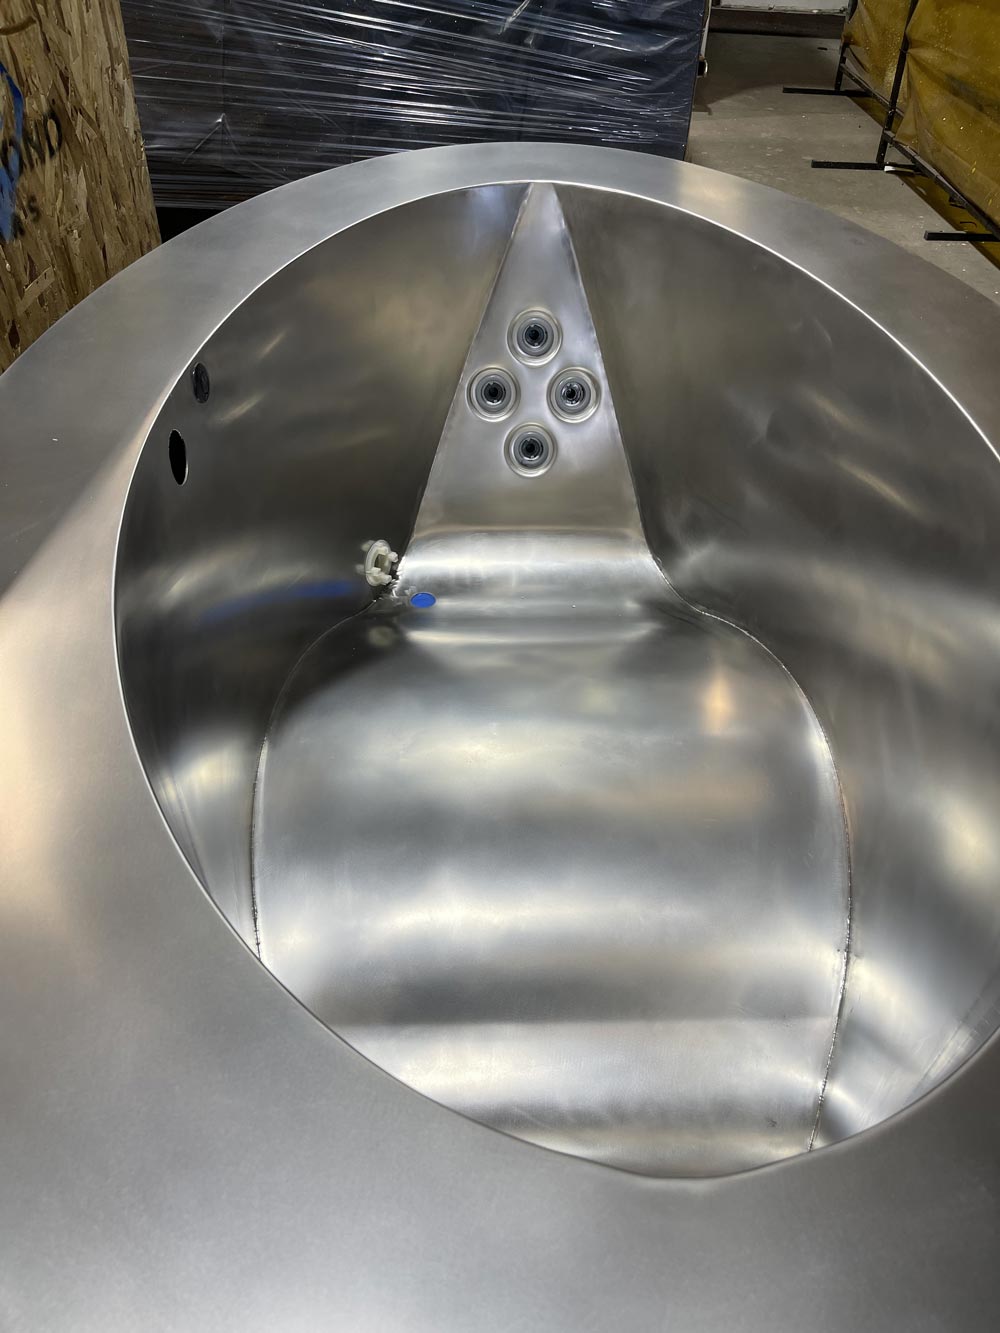 Stainless Steel Elliptical Bath with Jet System